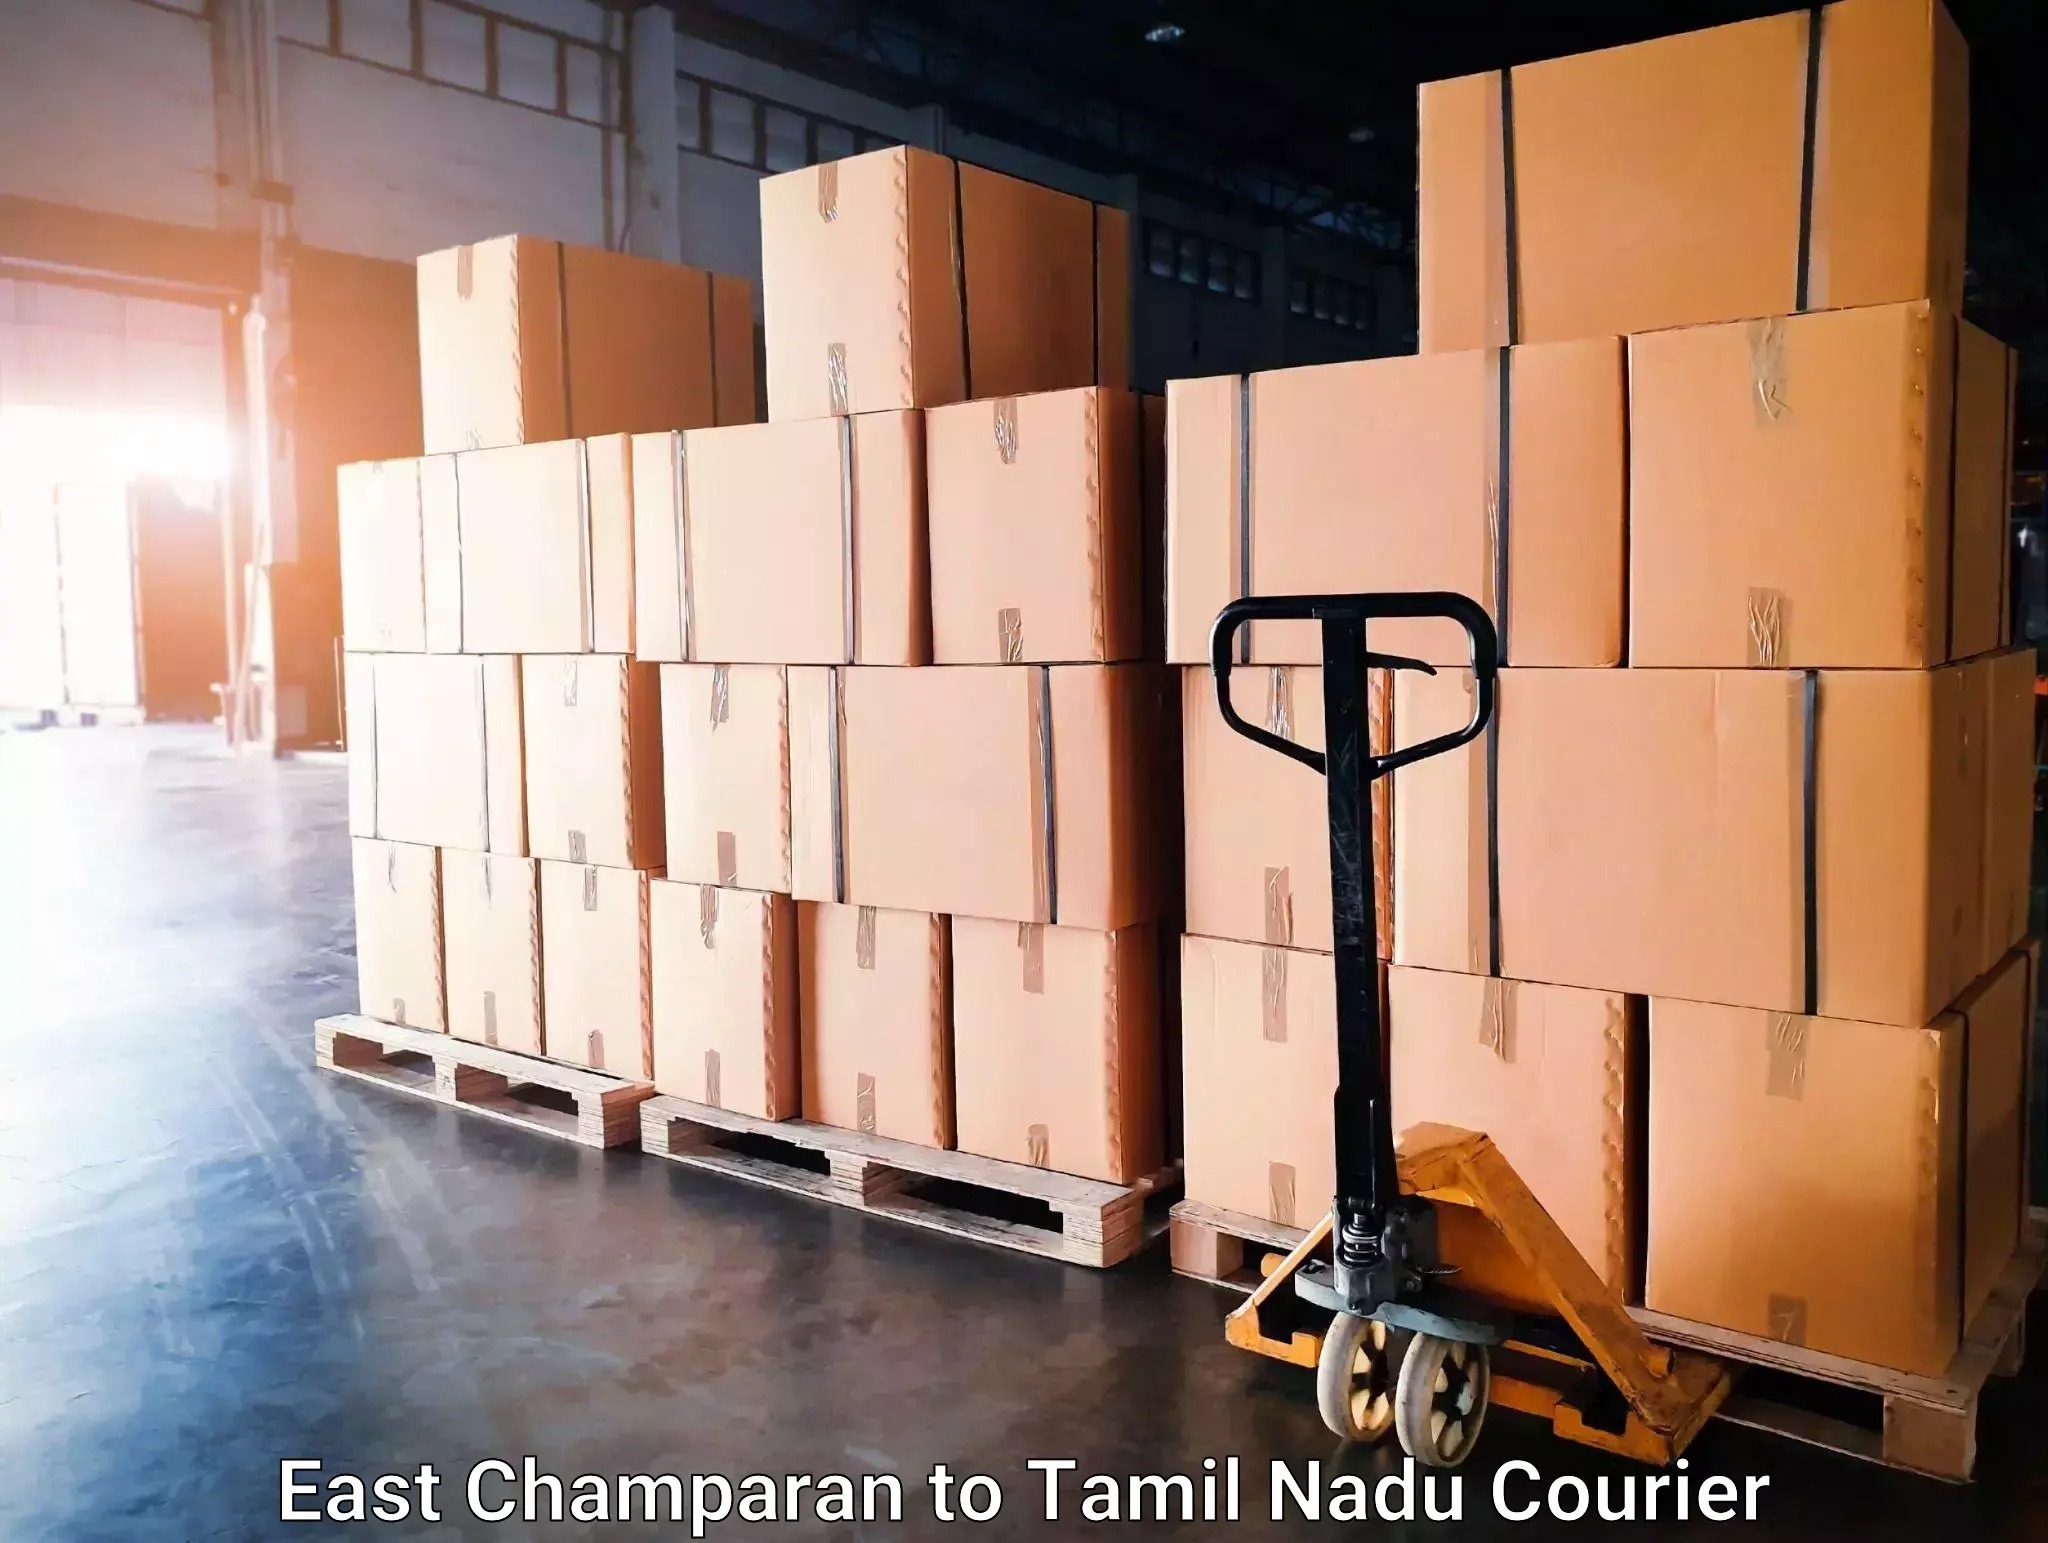 Trusted relocation experts East Champaran to Thoothukudi